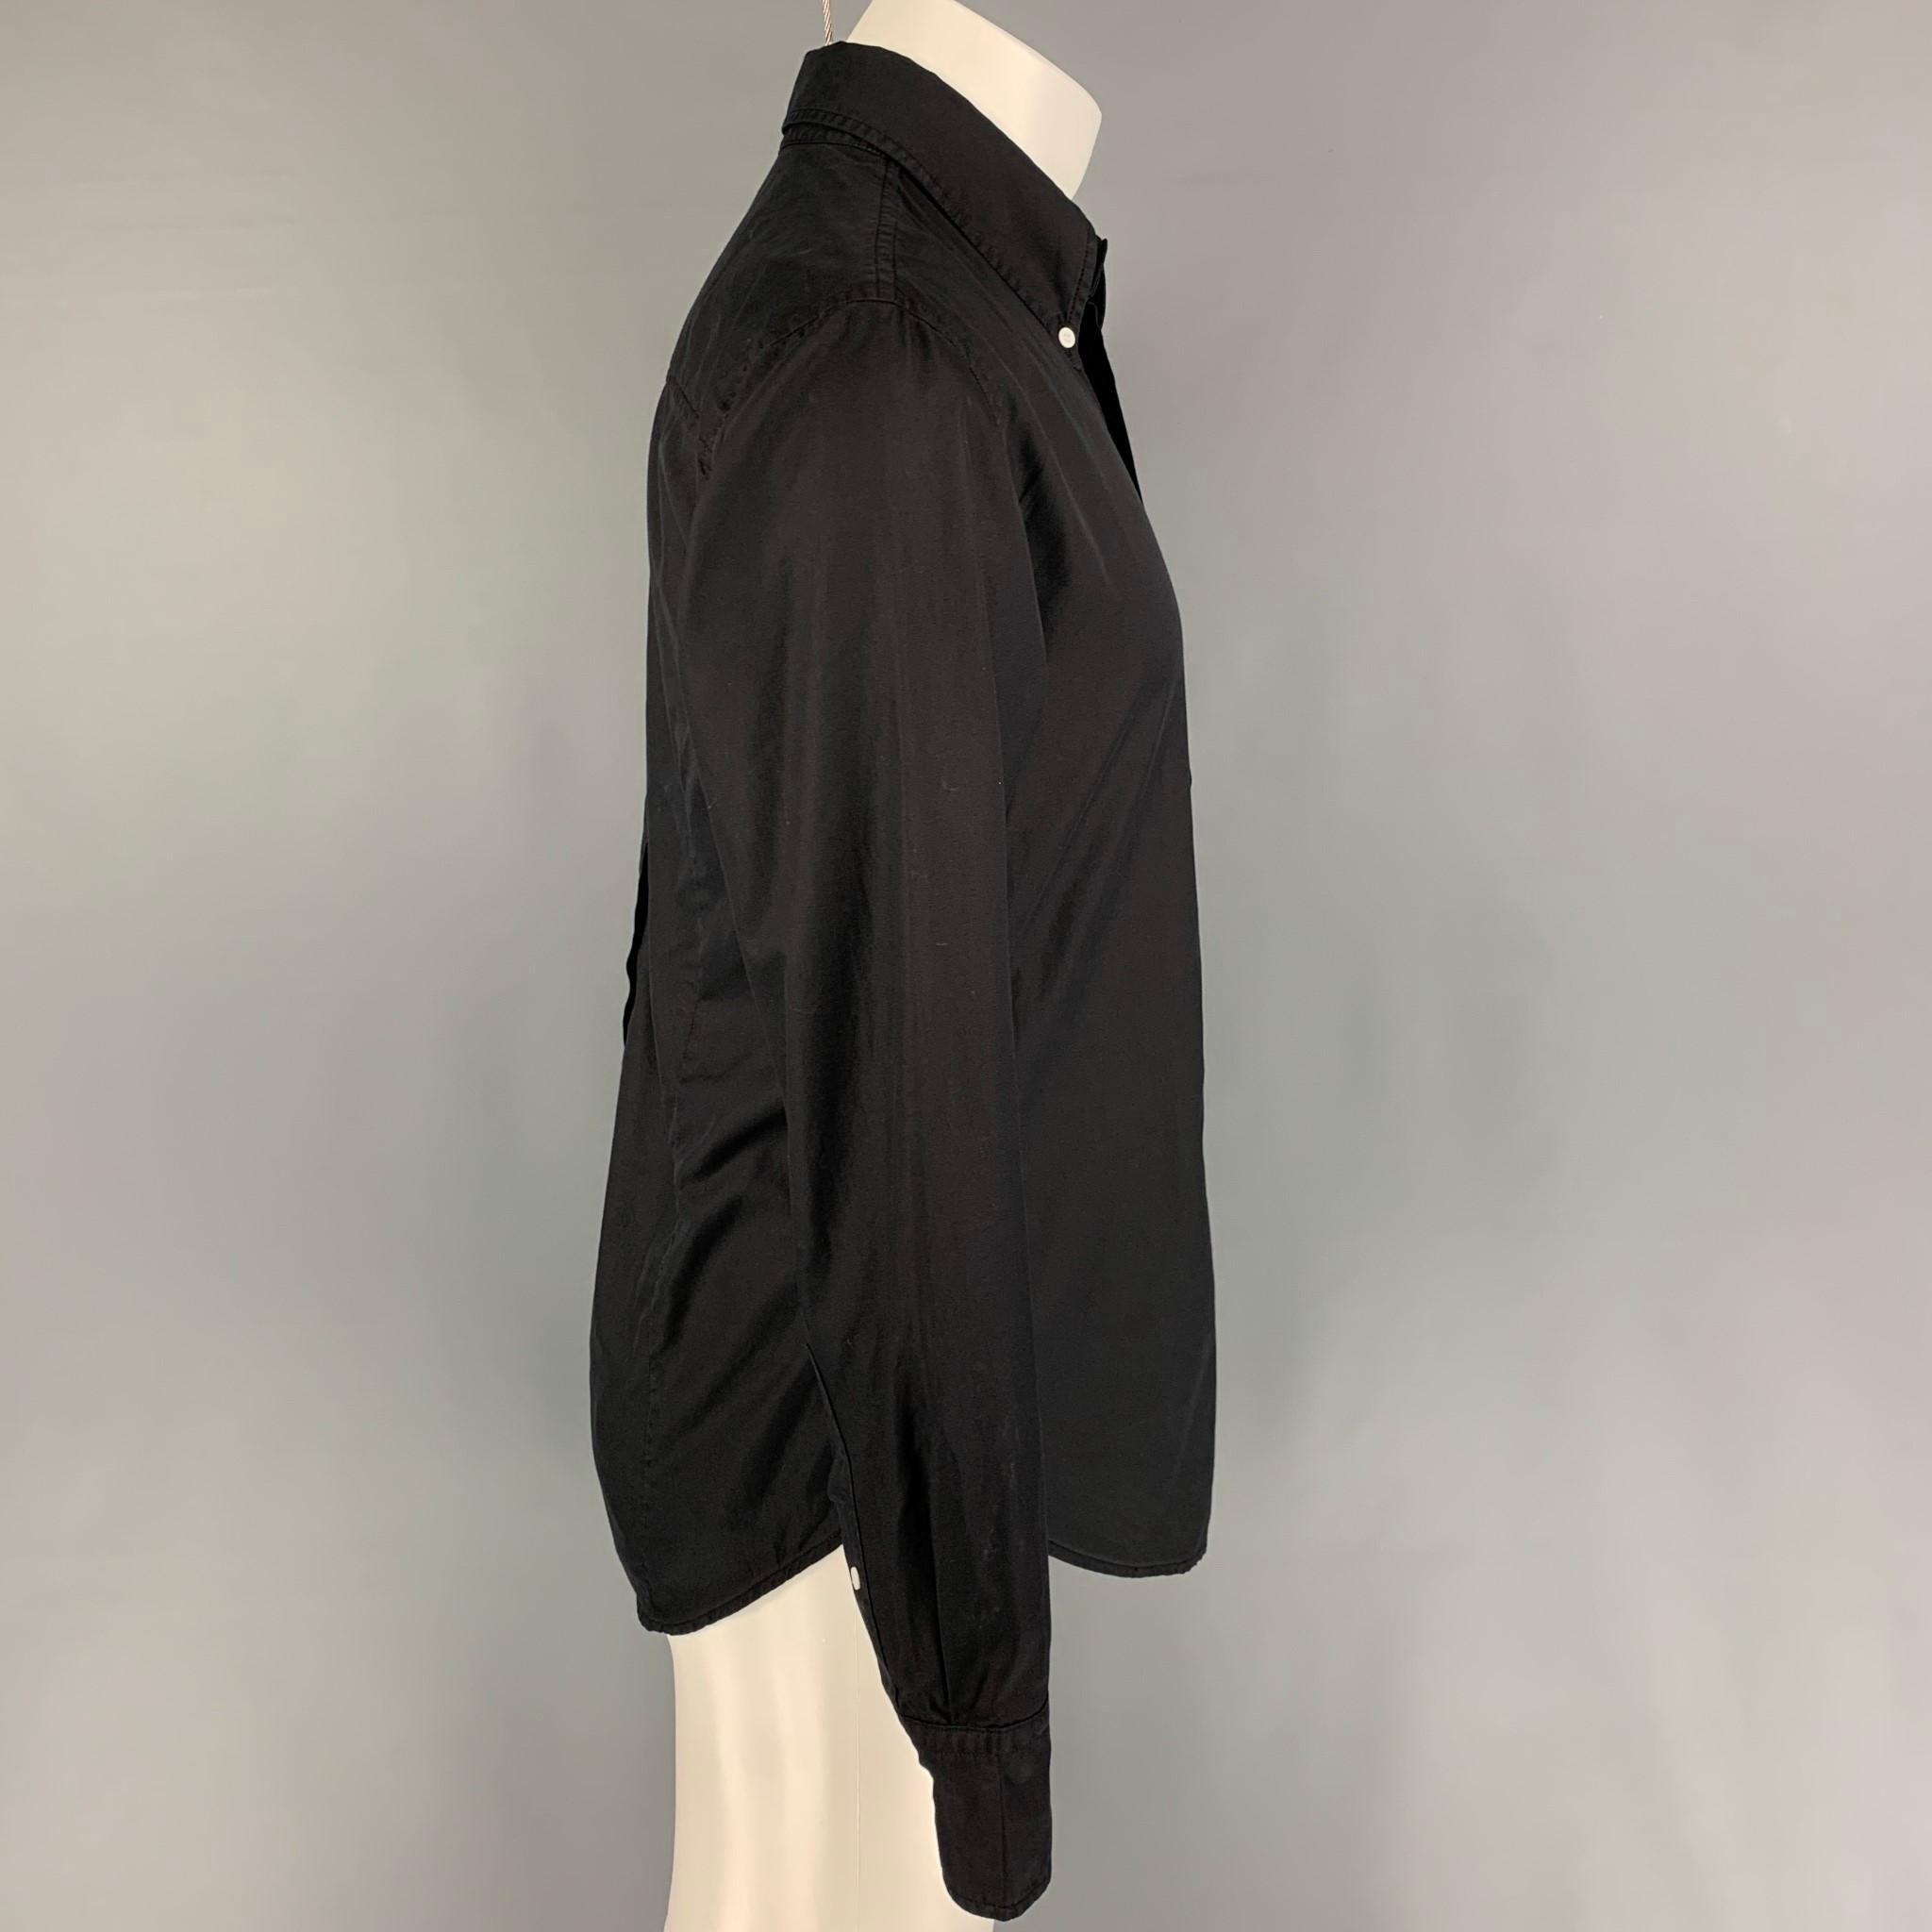 BAND OF OUTSIDERS long sleeve shirt comes in a black material featuring a button down collar, patch pocket, and a button u closure. 

Very Good Pre-Owned Condition. Fabric tag removed.
Marked: 3

Measurements:

Shoulder: 18 in.
Chest: 40 in.
Sleeve: